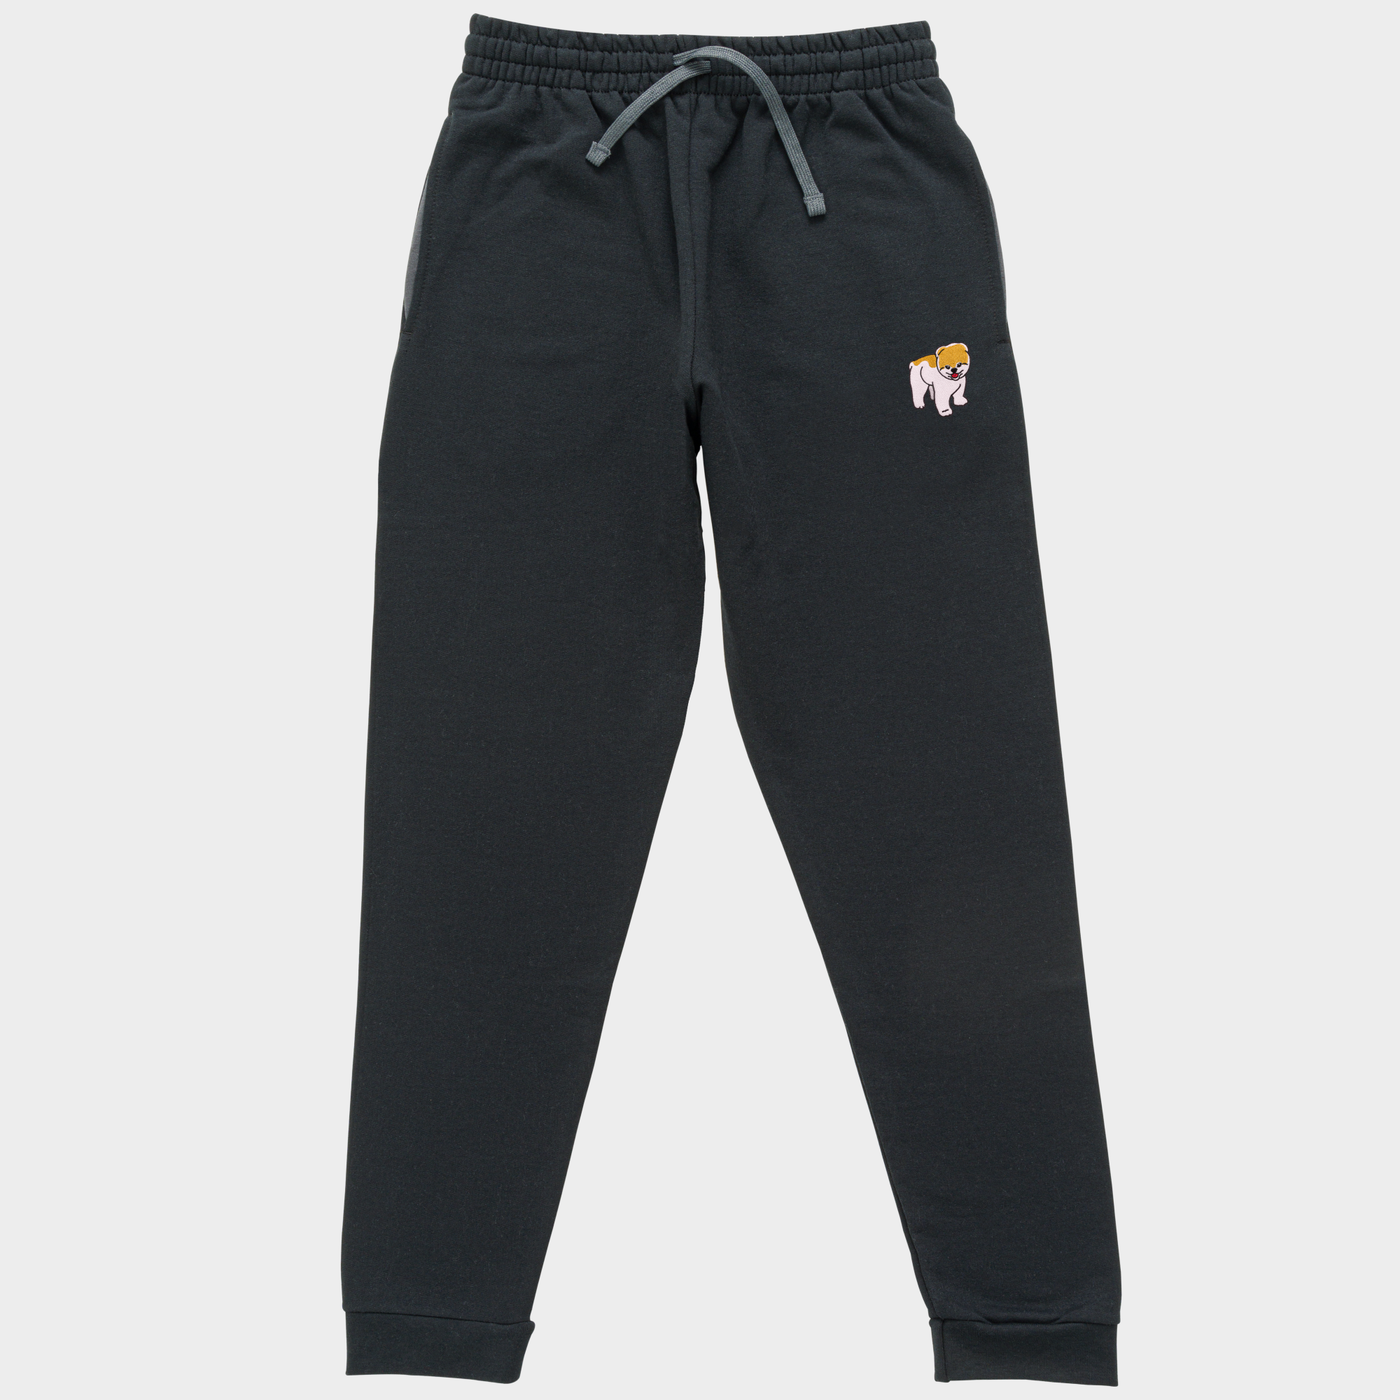 Bobby's Planet Unisex Embroidered Pomeranian Joggers from Paws Dog Cat Animals Collection in Black Color#color_black